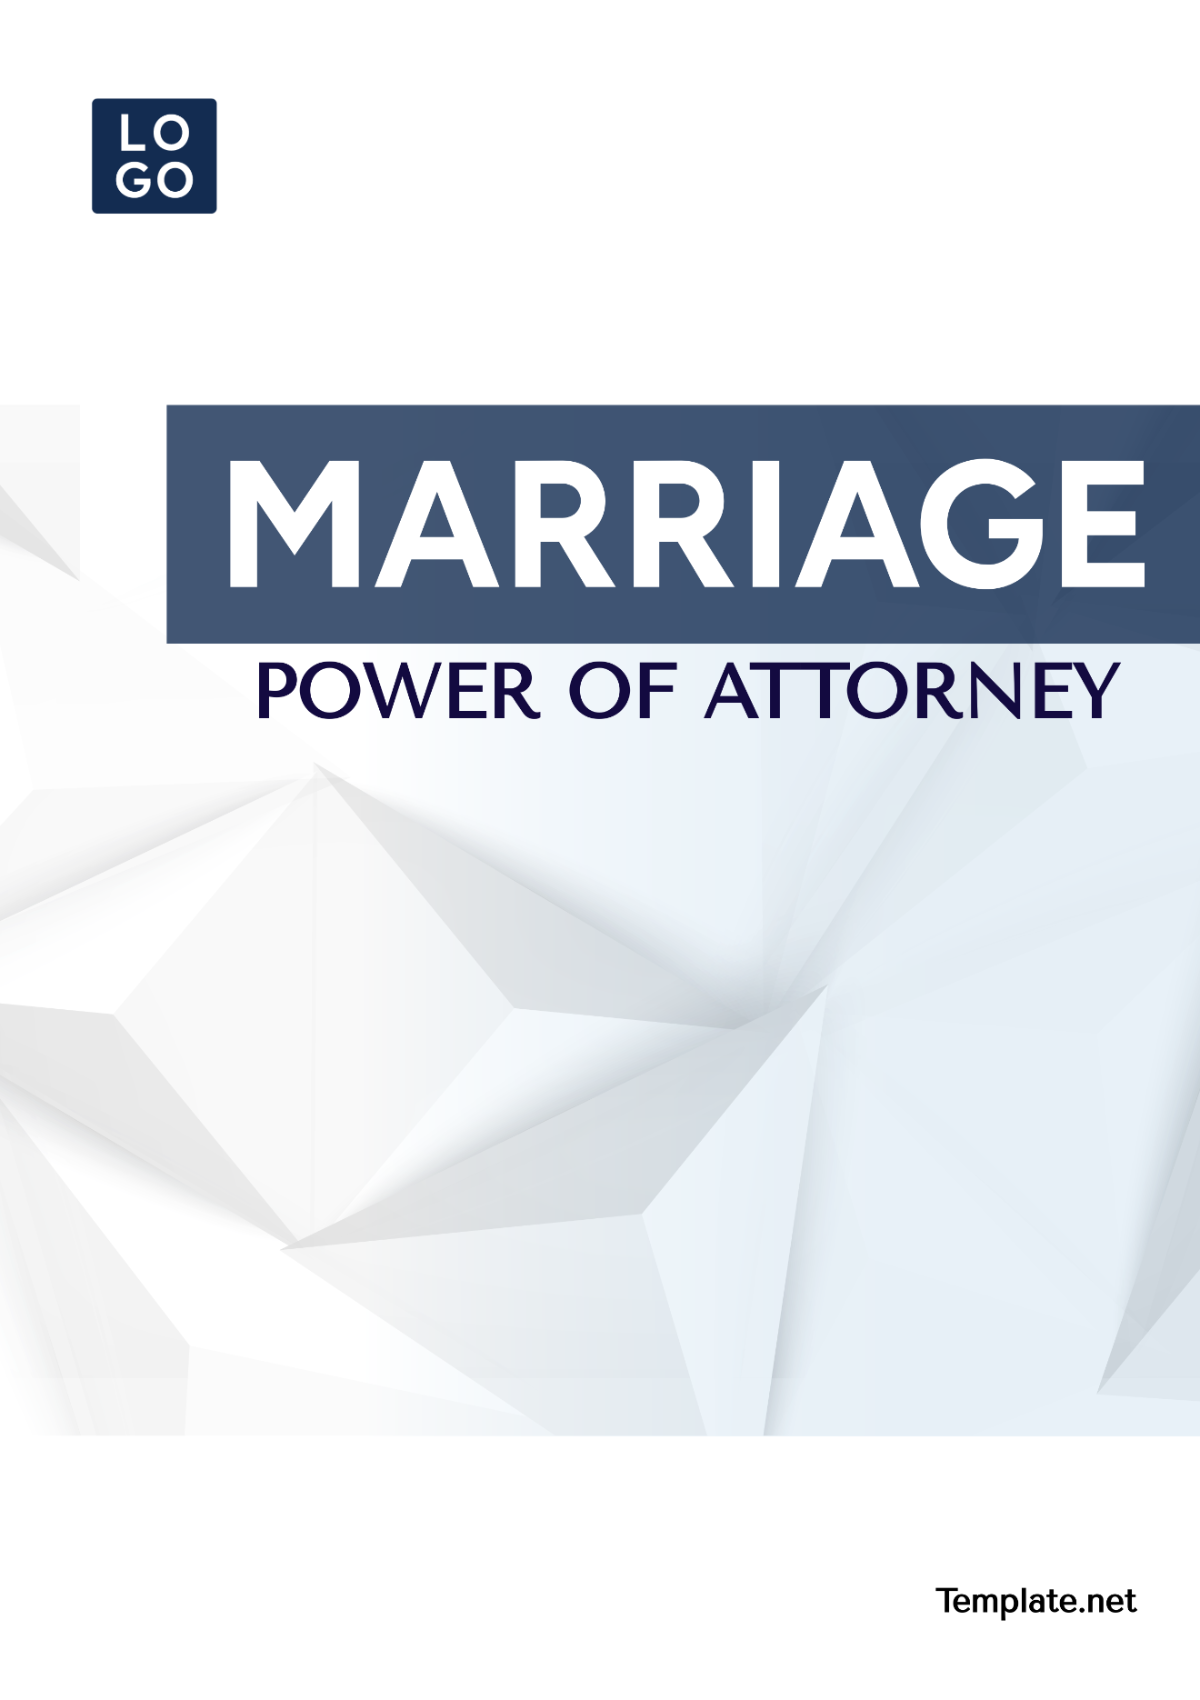 Marriage Power of Attorney Template